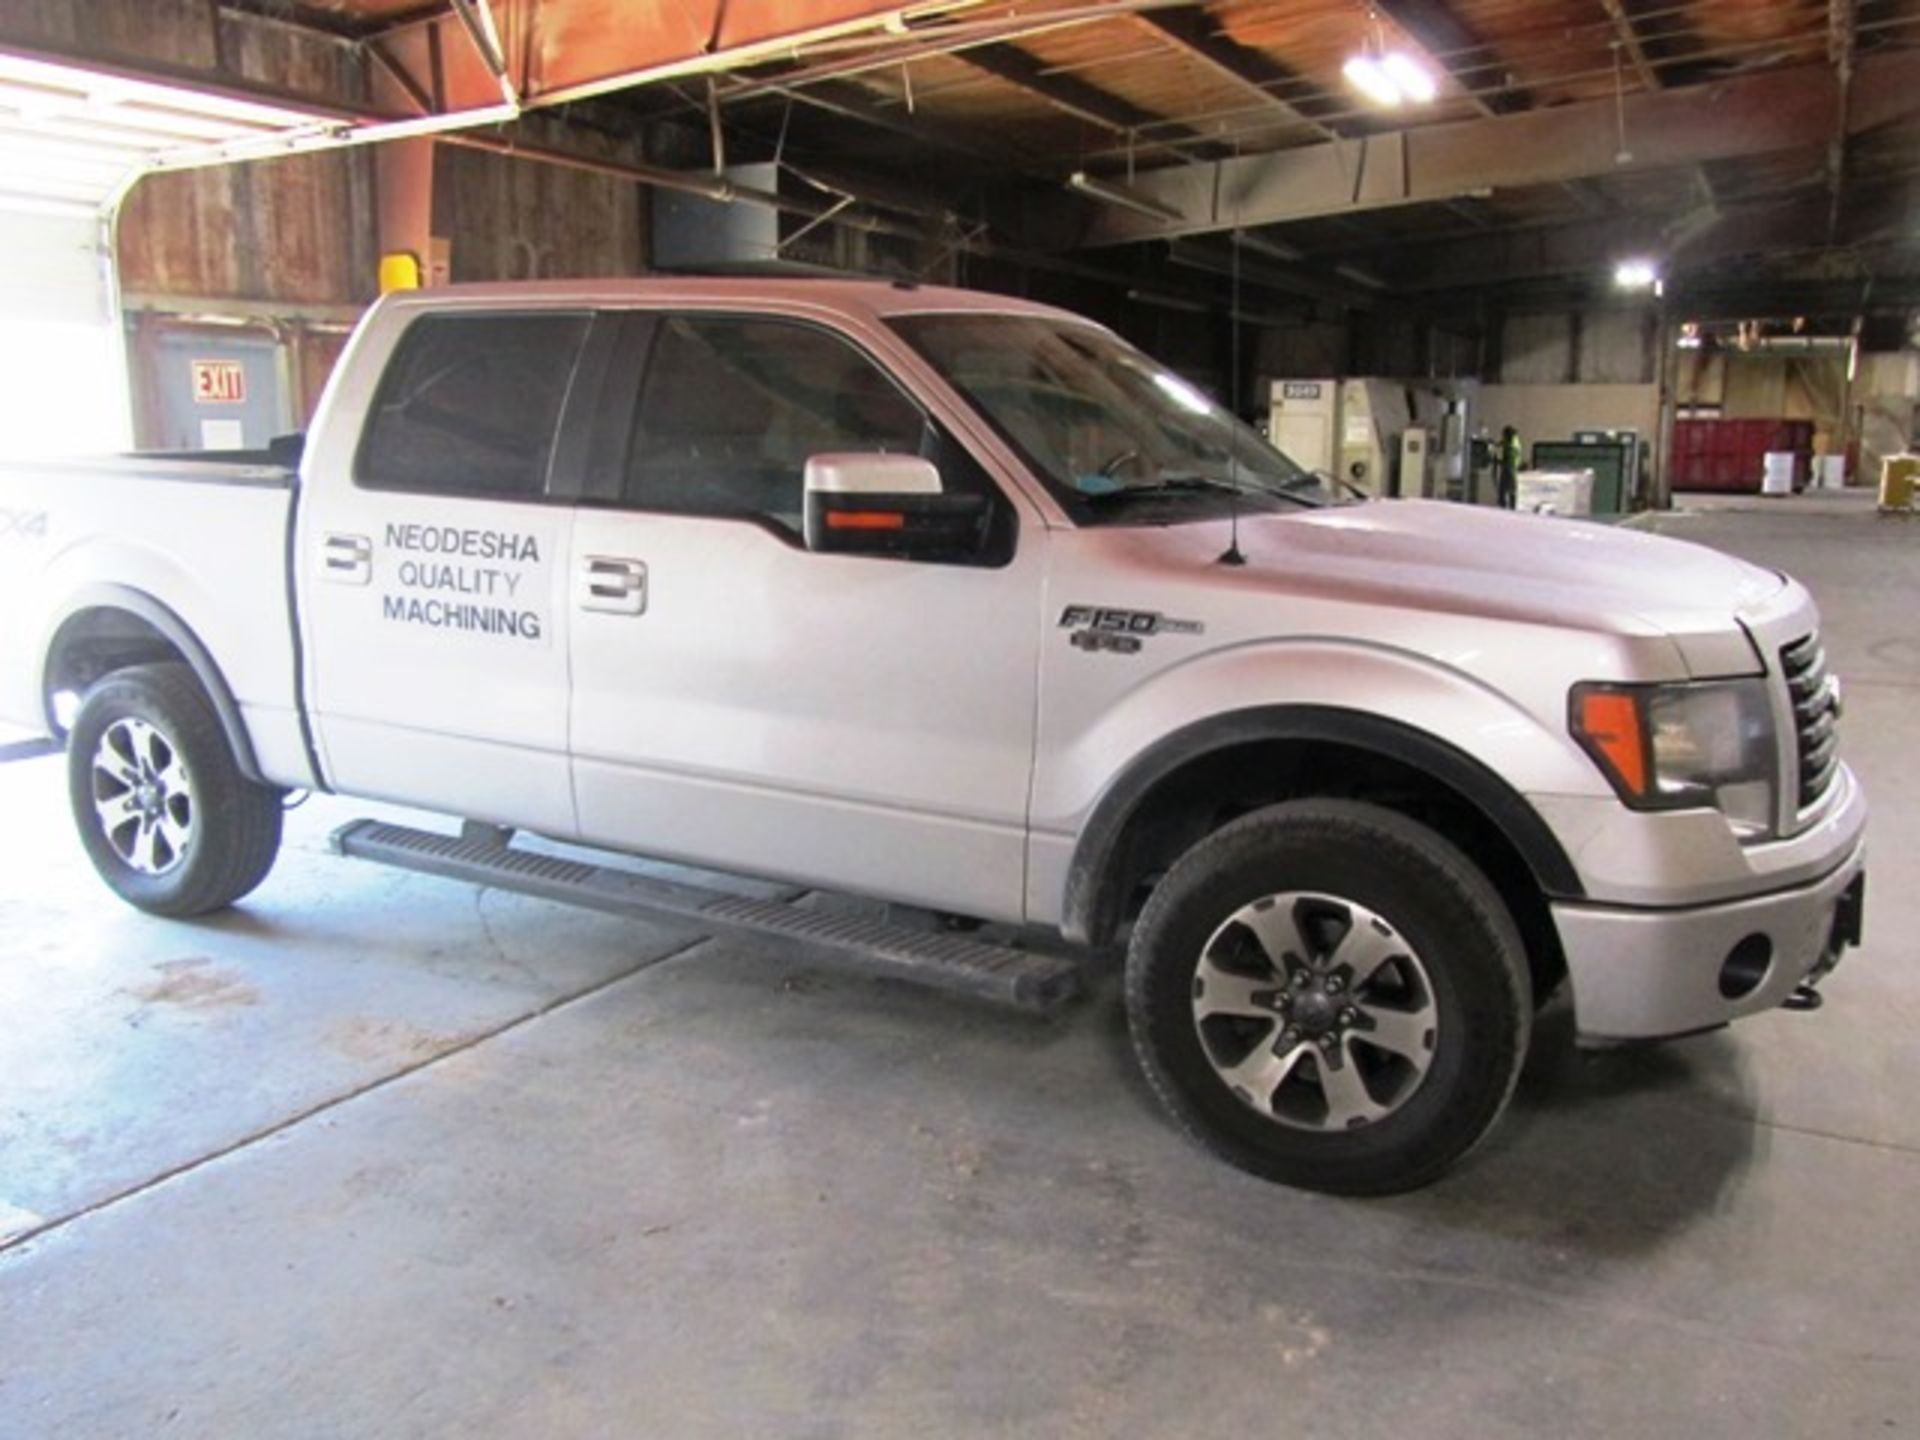 Ford F150 FX4 Crew Cab Pick-Up Truck with Short Bed, Running Boards, Automatic Transmission, 5.4